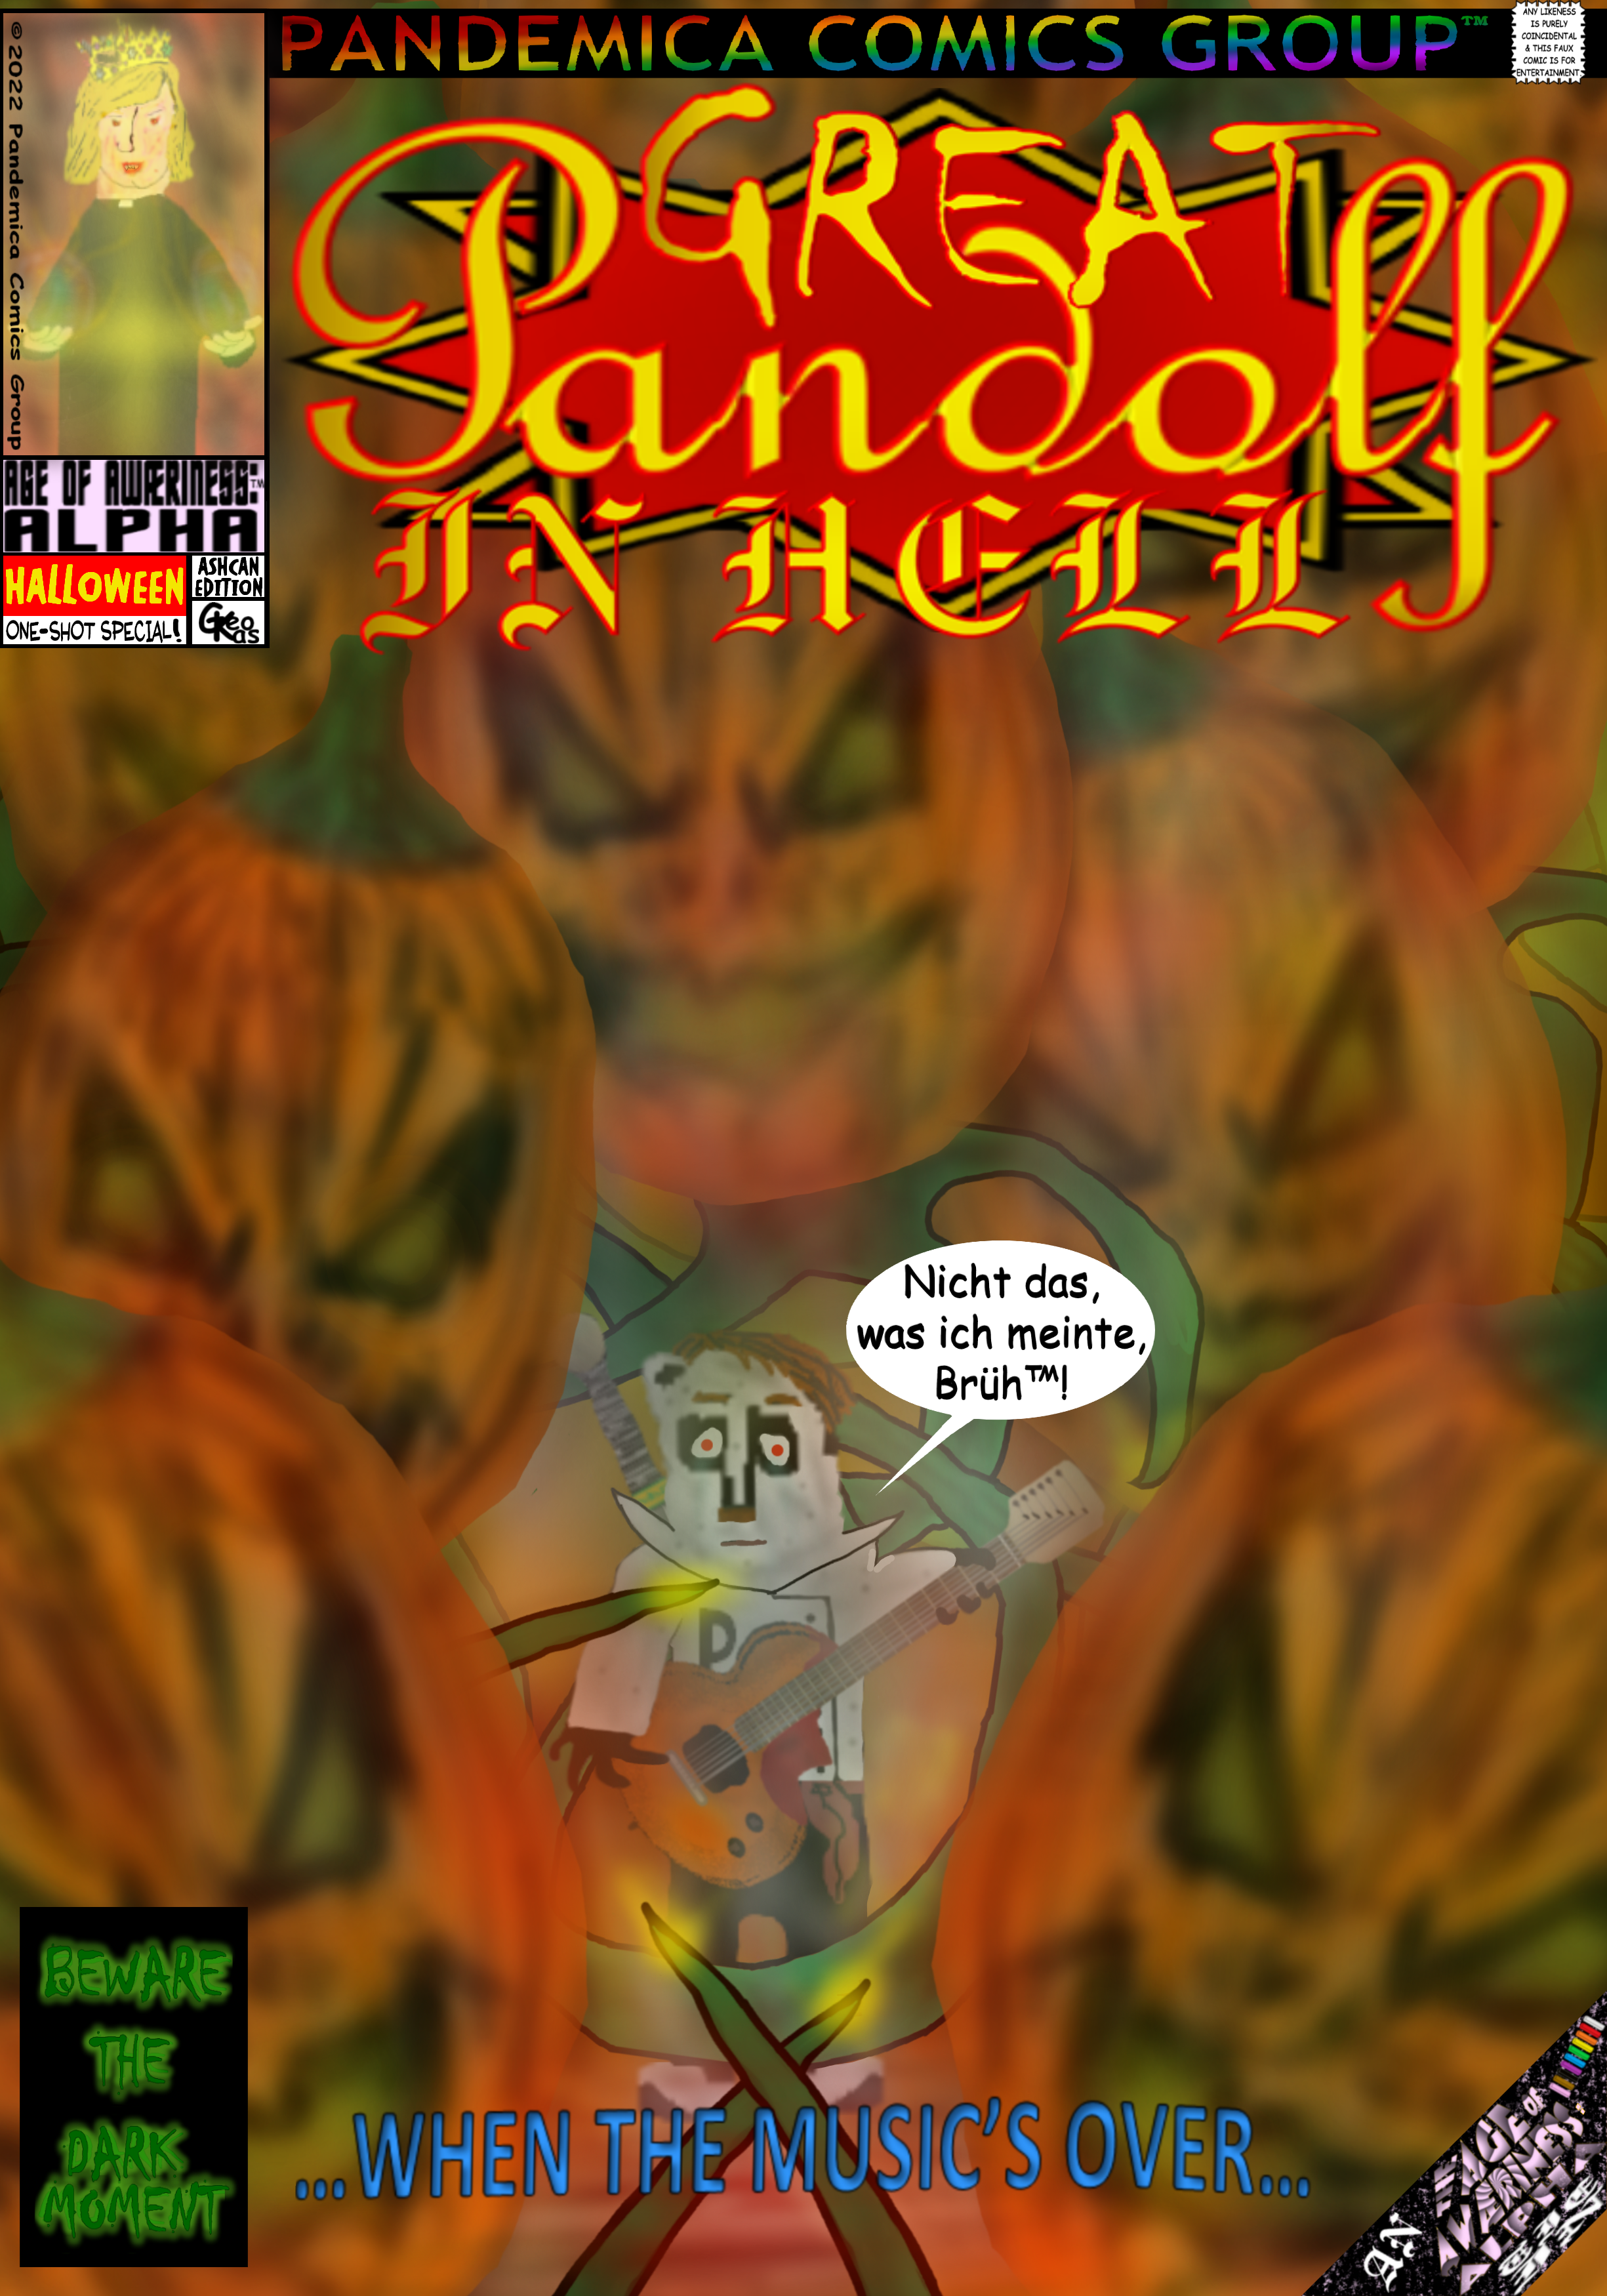 Great Pandolf in HELL one-shot